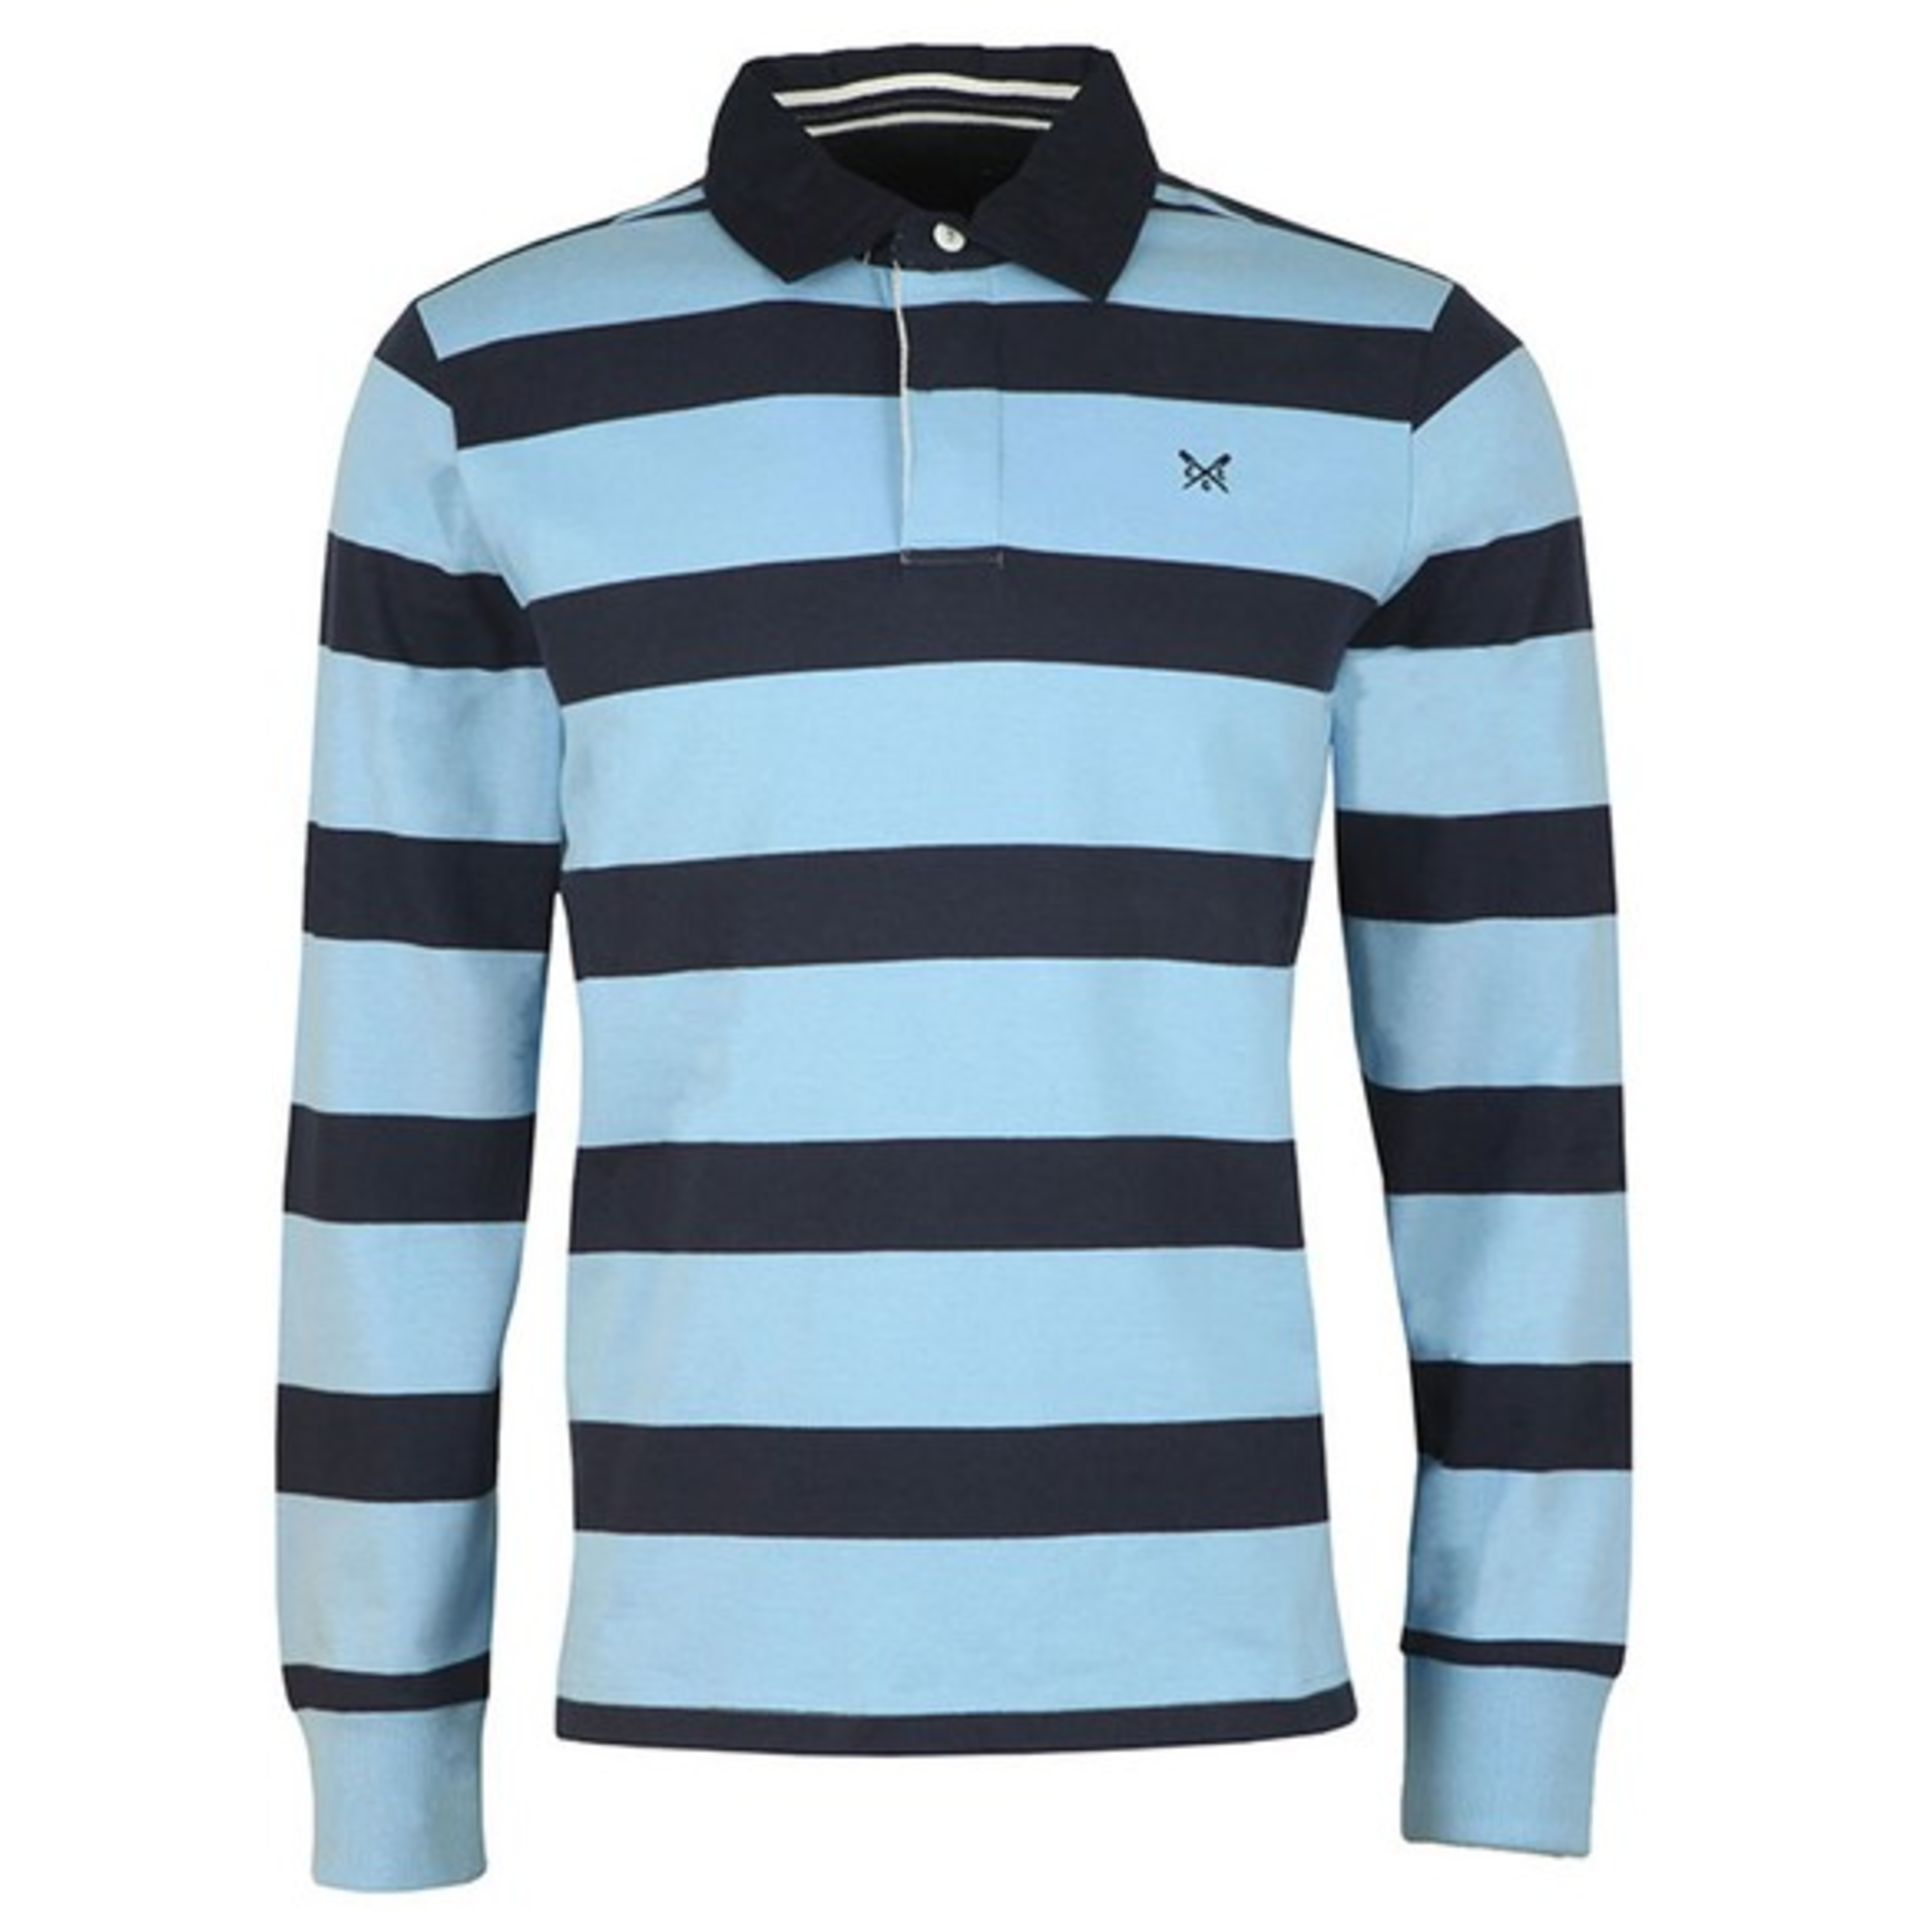 BRAND NEW CREW CLOTHING ICE BLUE AND NAVY RUGBY TOP SIZE MEDIUM RRP £65 -2